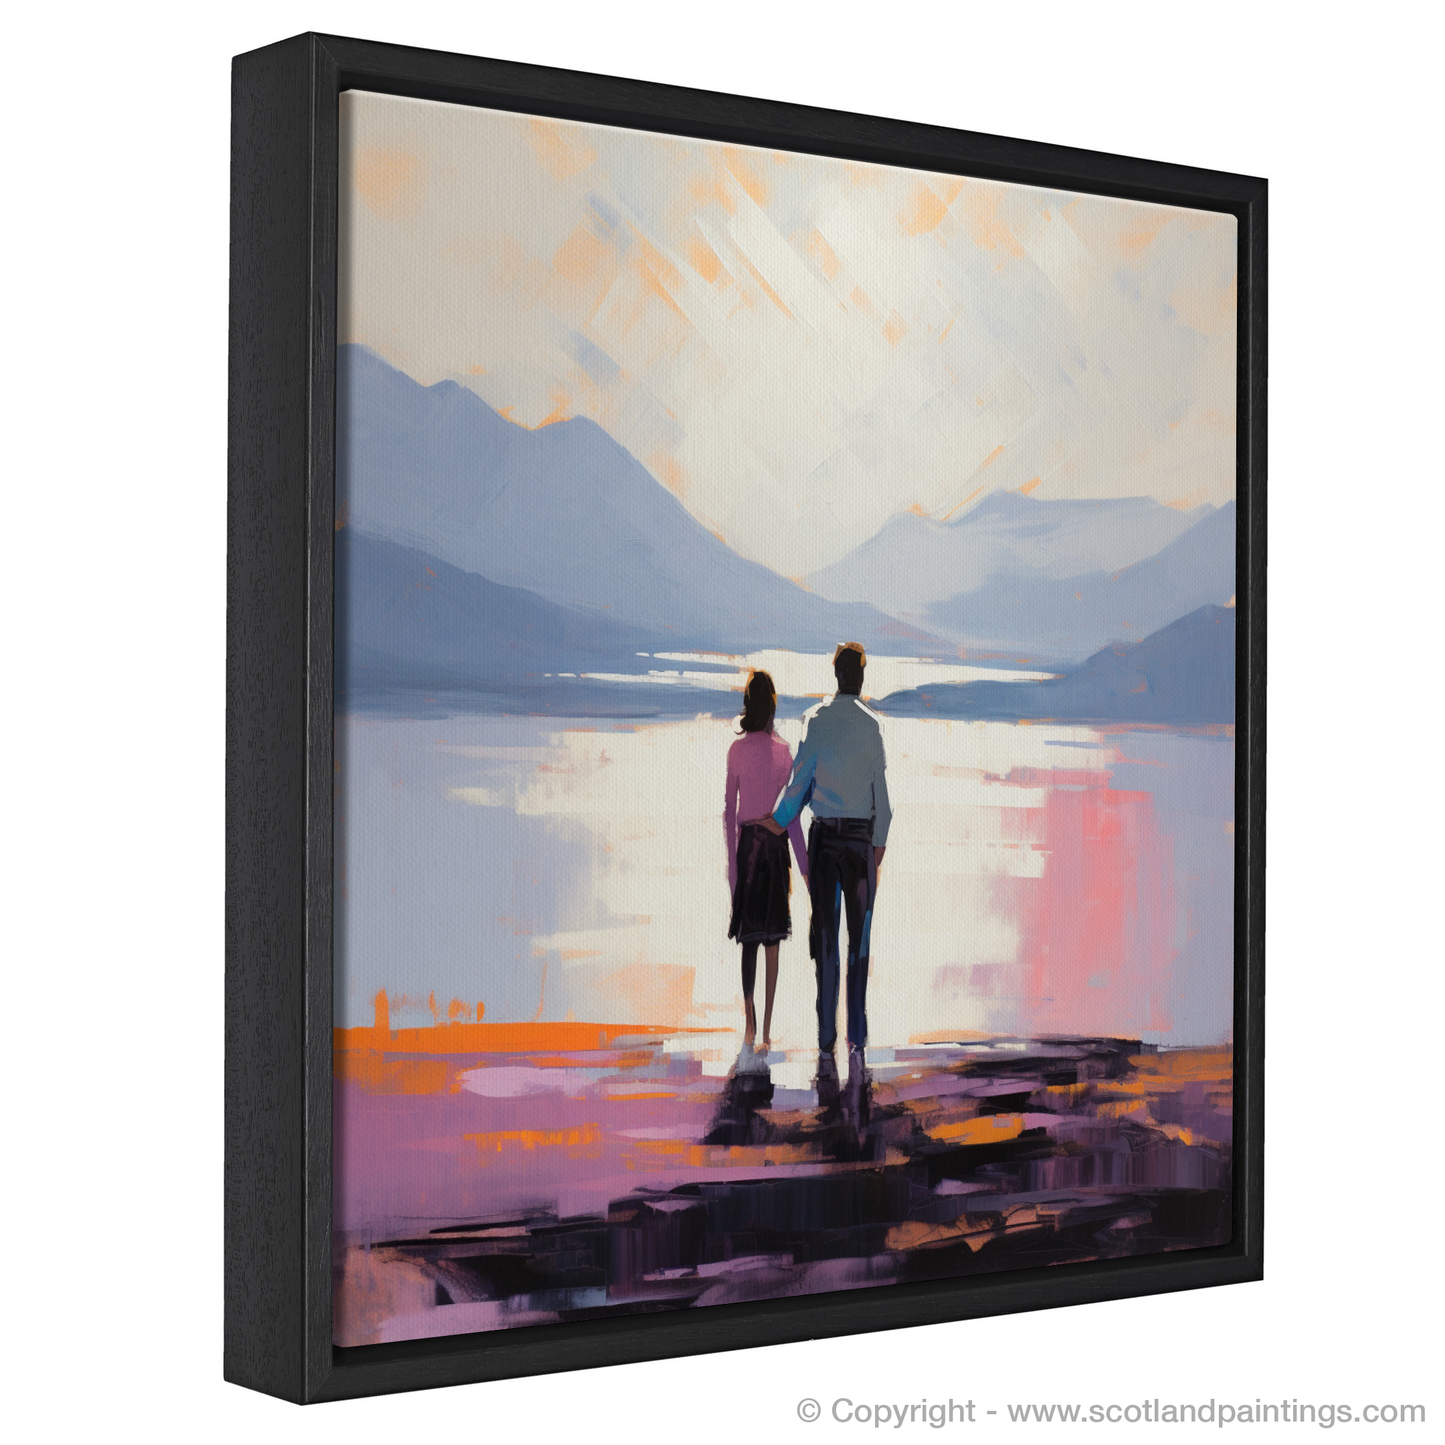 Painting and Art Print of A couple holding hands looking out on Loch Lomond entitled "Embrace at Dusk: A Loch Lomond Rendezvous".